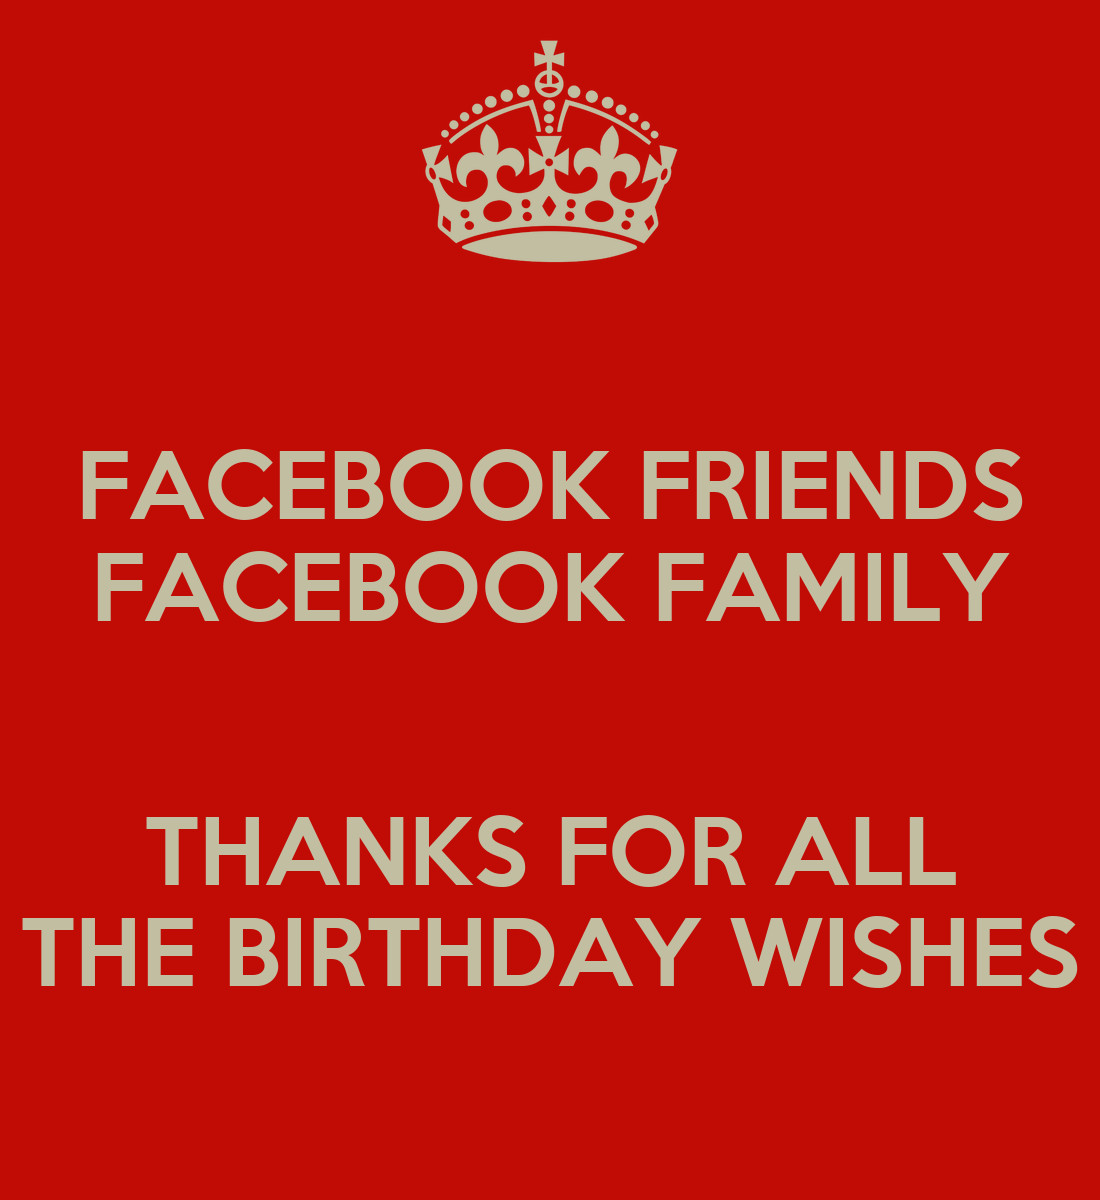 Thanks For Birthday Wishes Facebook
 FACEBOOK FRIENDS FACEBOOK FAMILY THANKS FOR ALL THE